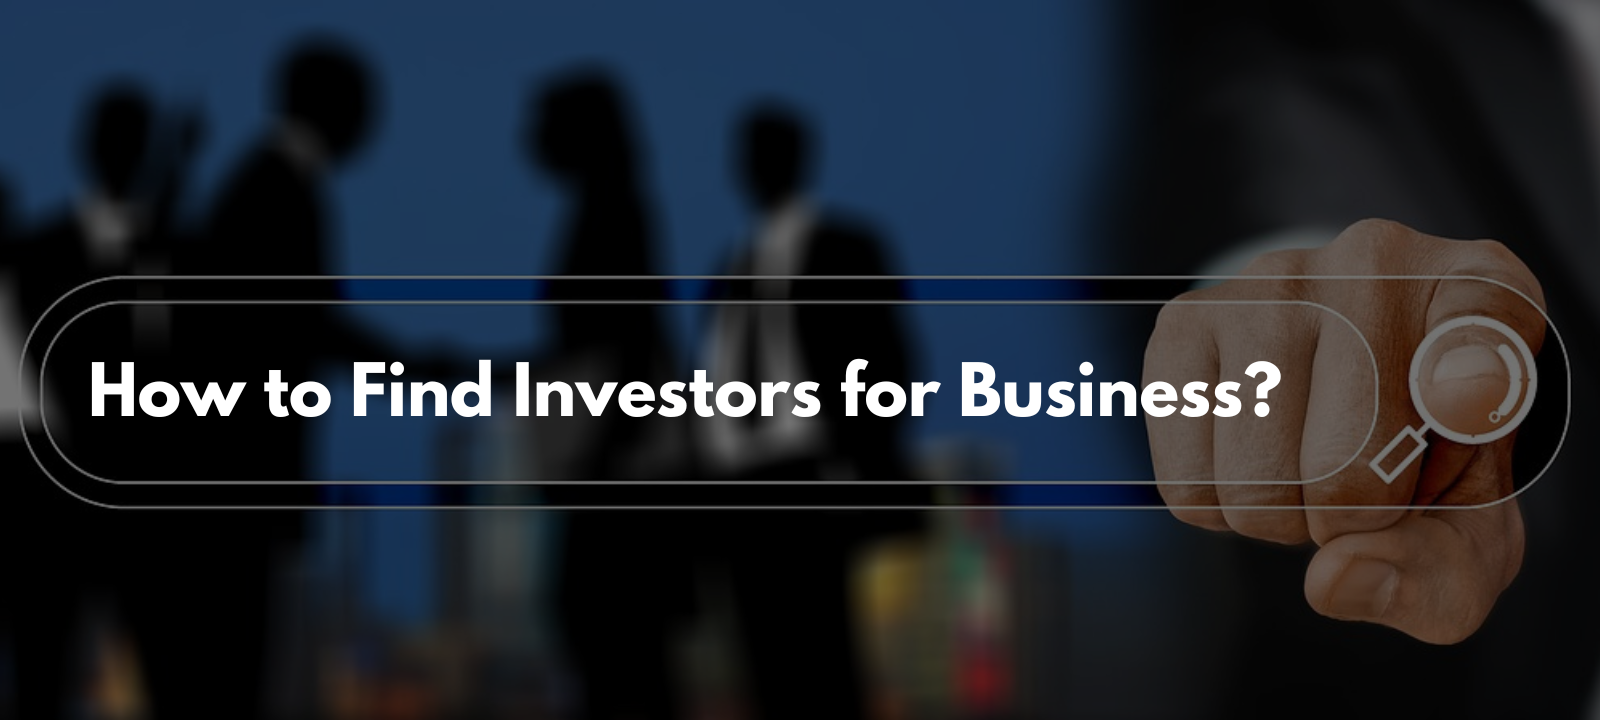 How to Find Investors for Business?